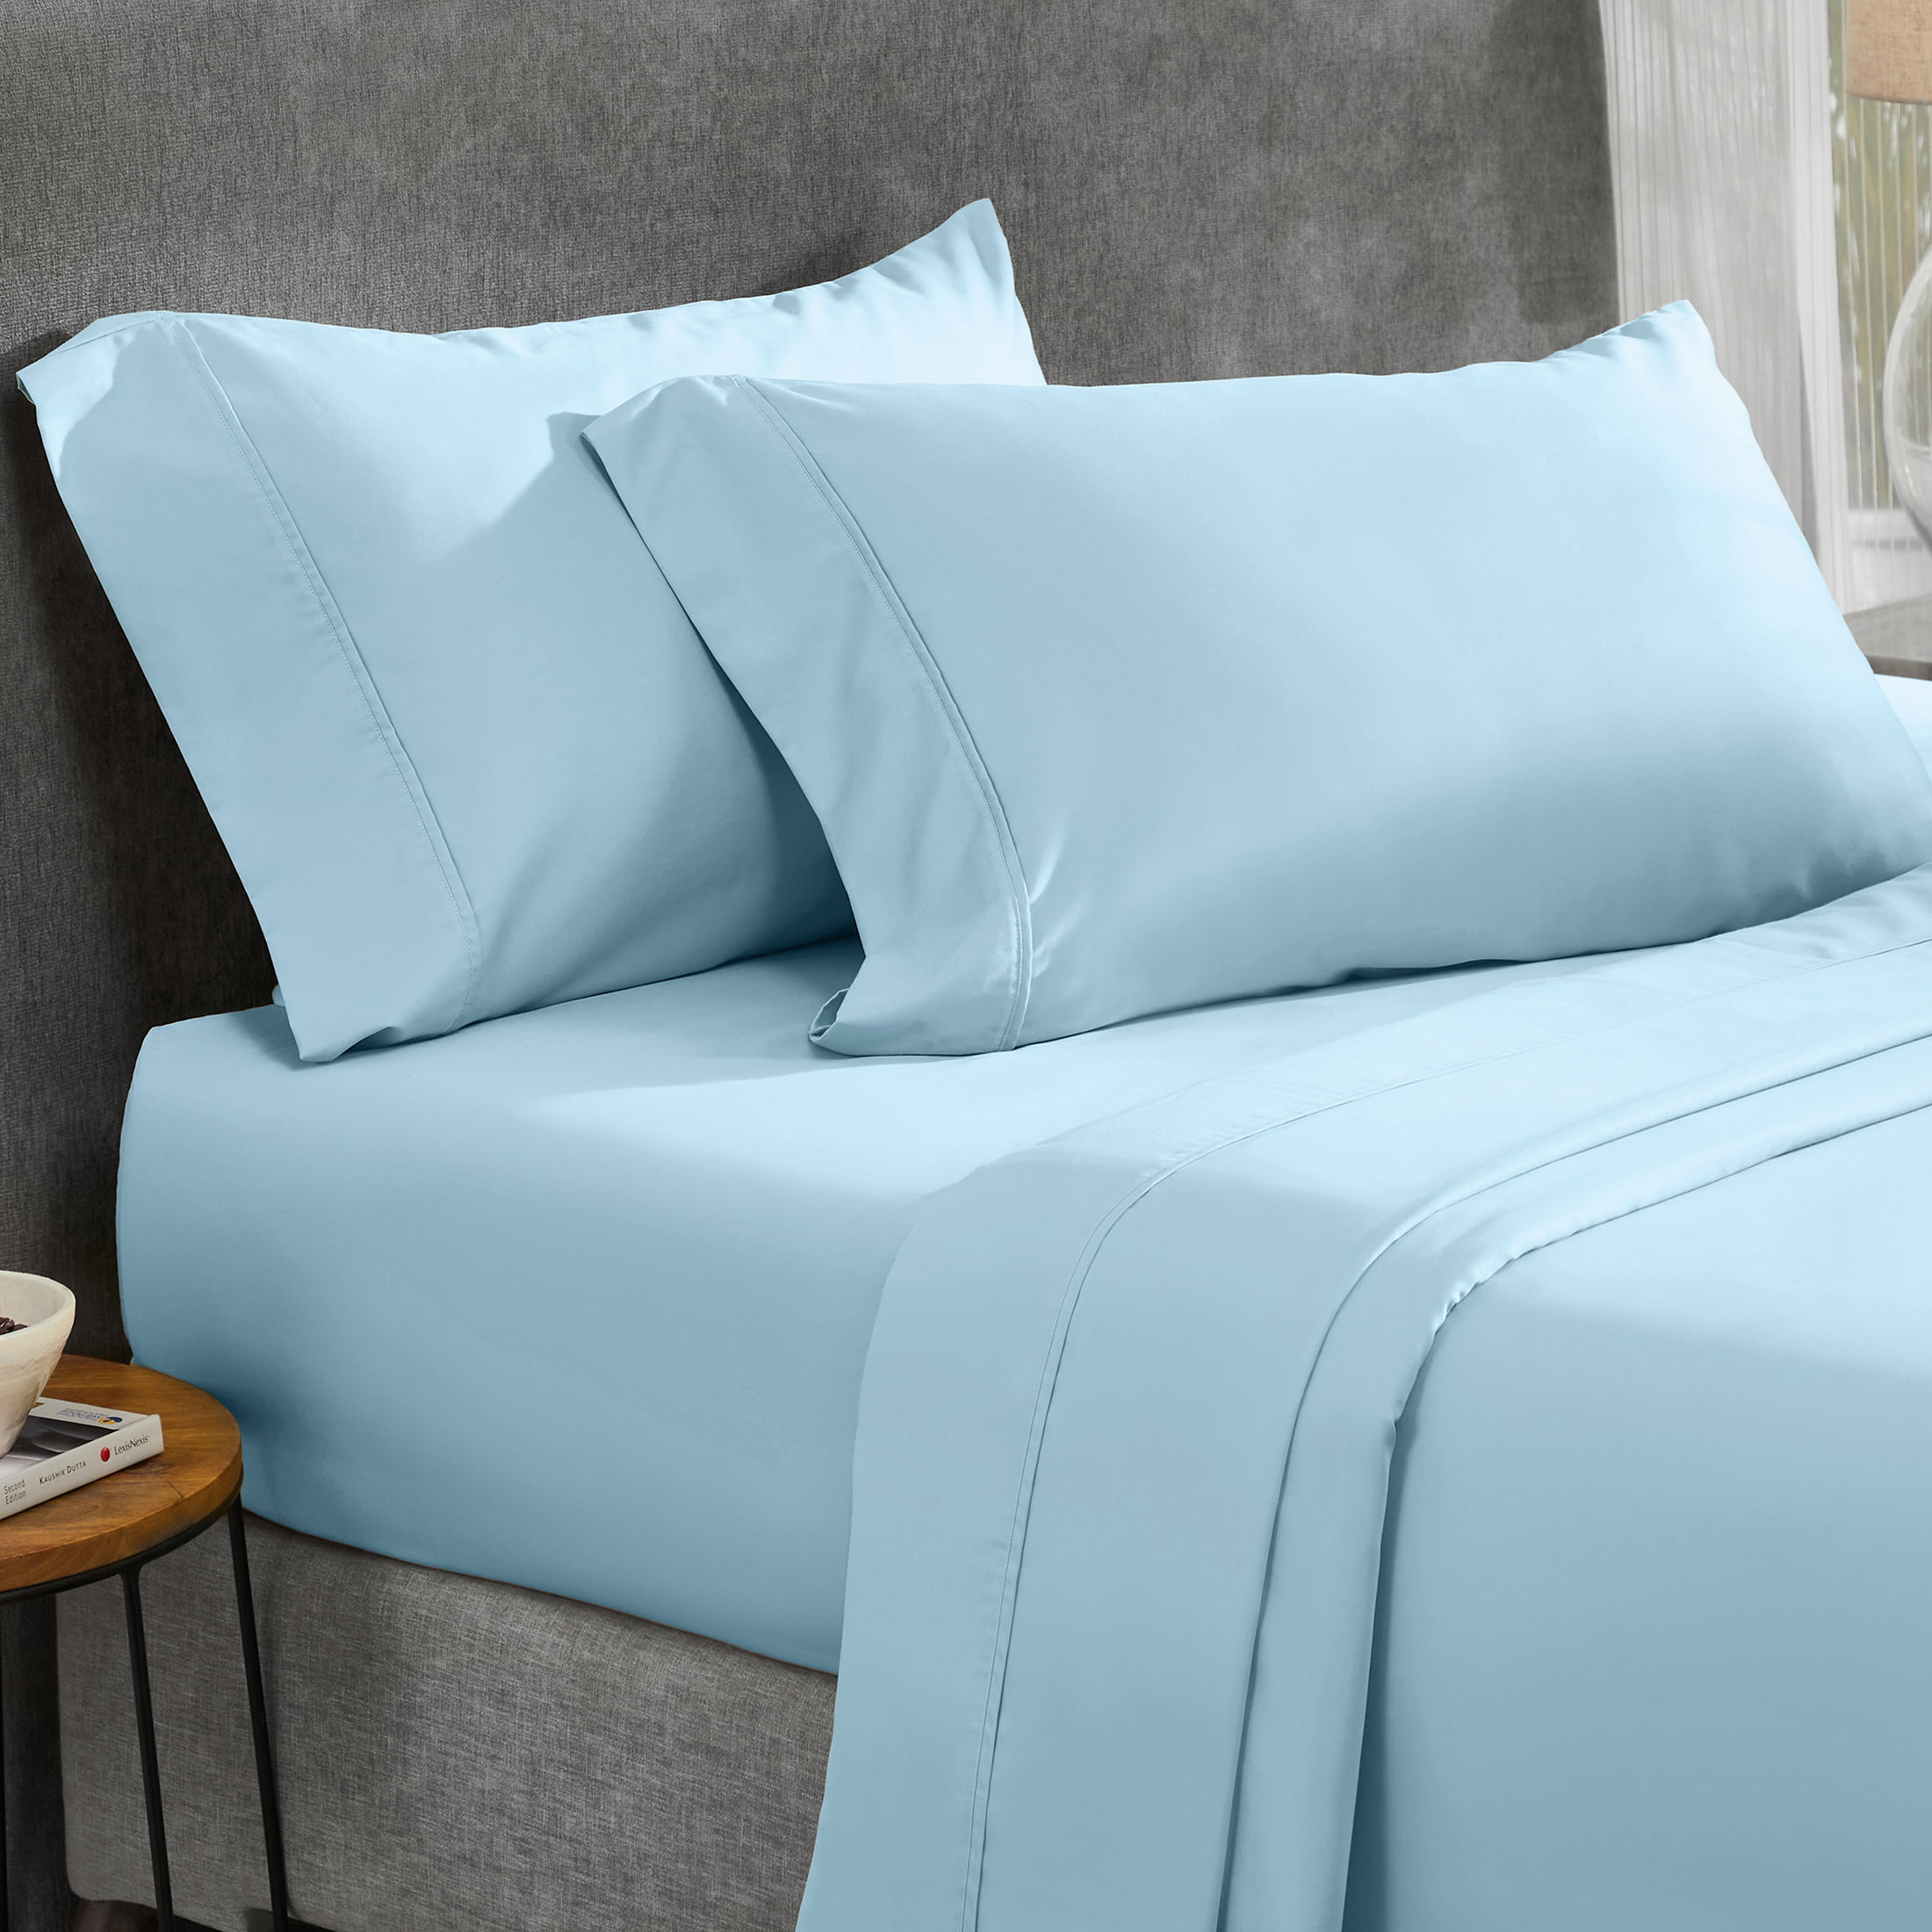 Details about   500 Thread Count Queen Frost Gray 100% Cotton Sheets & Pillowcase Set,4 Pc Extra 